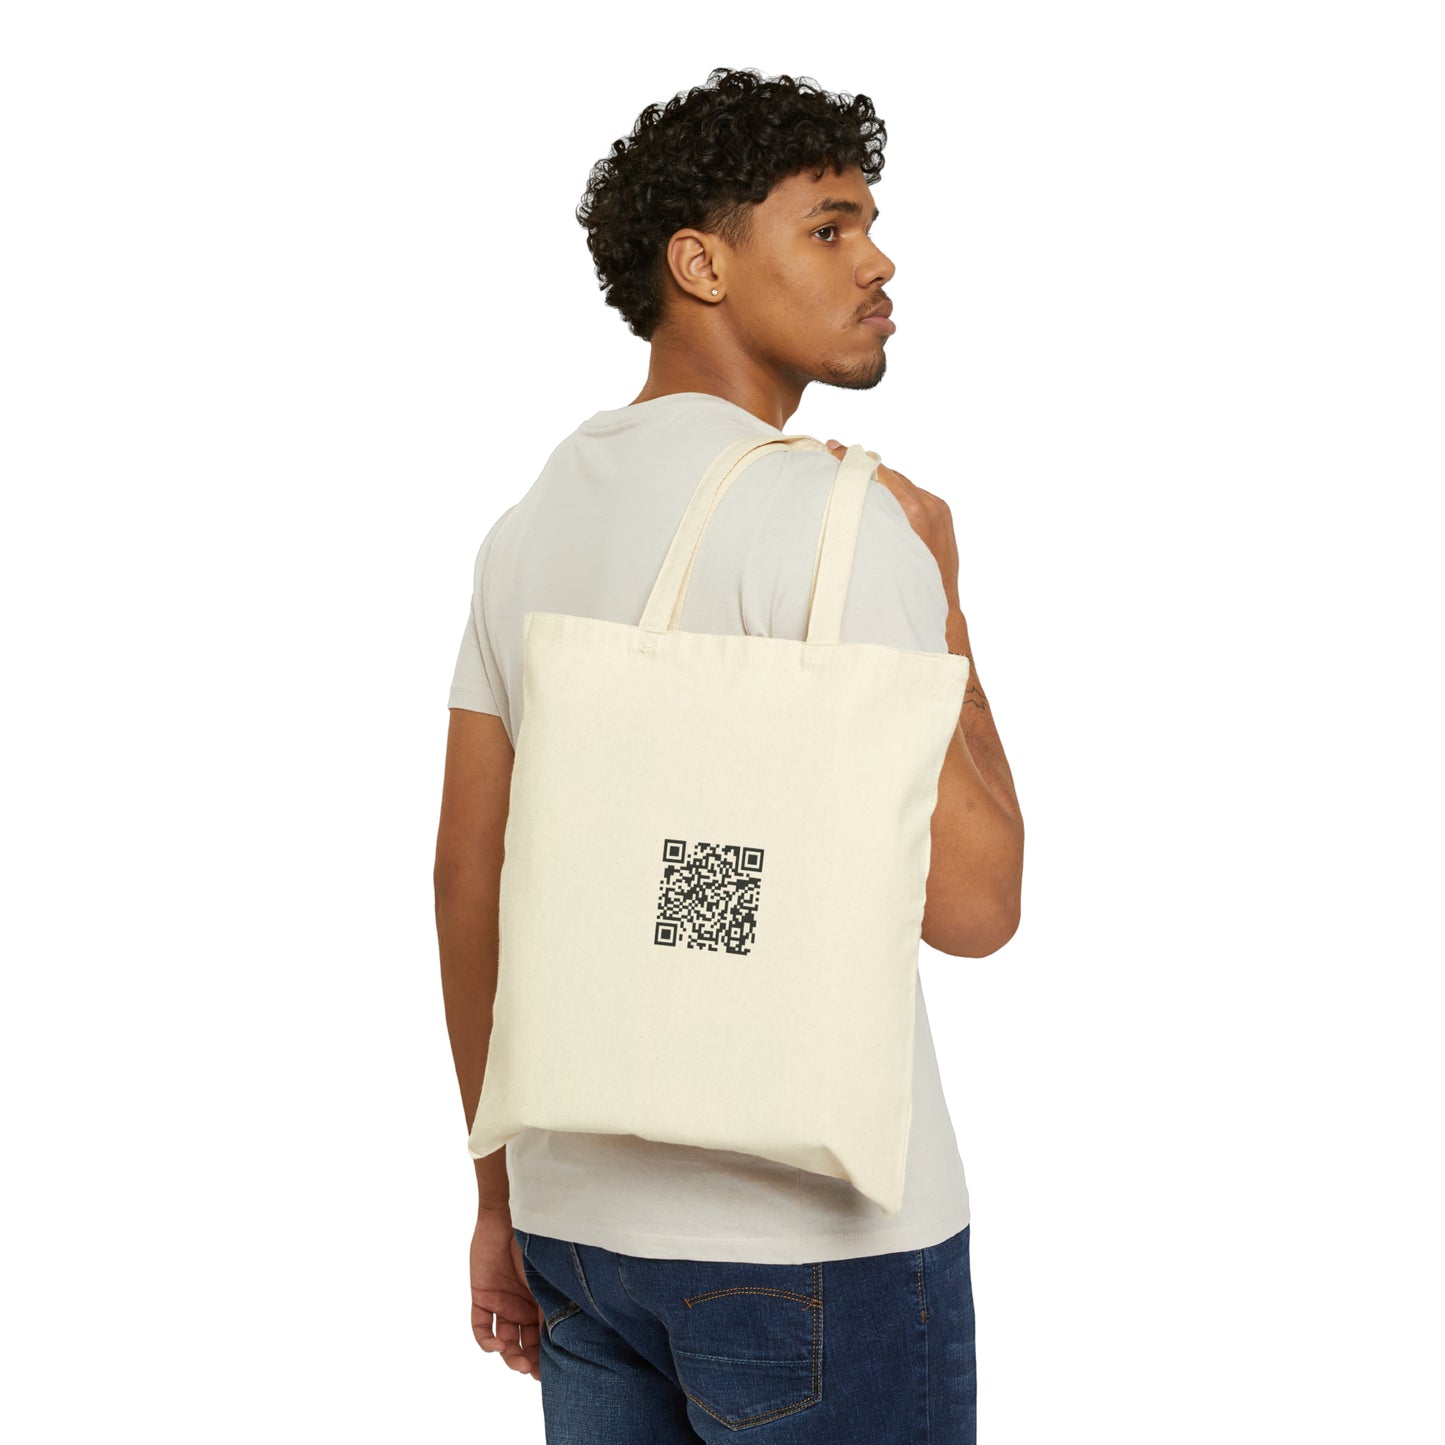 Friction - Cotton Canvas Tote Bag